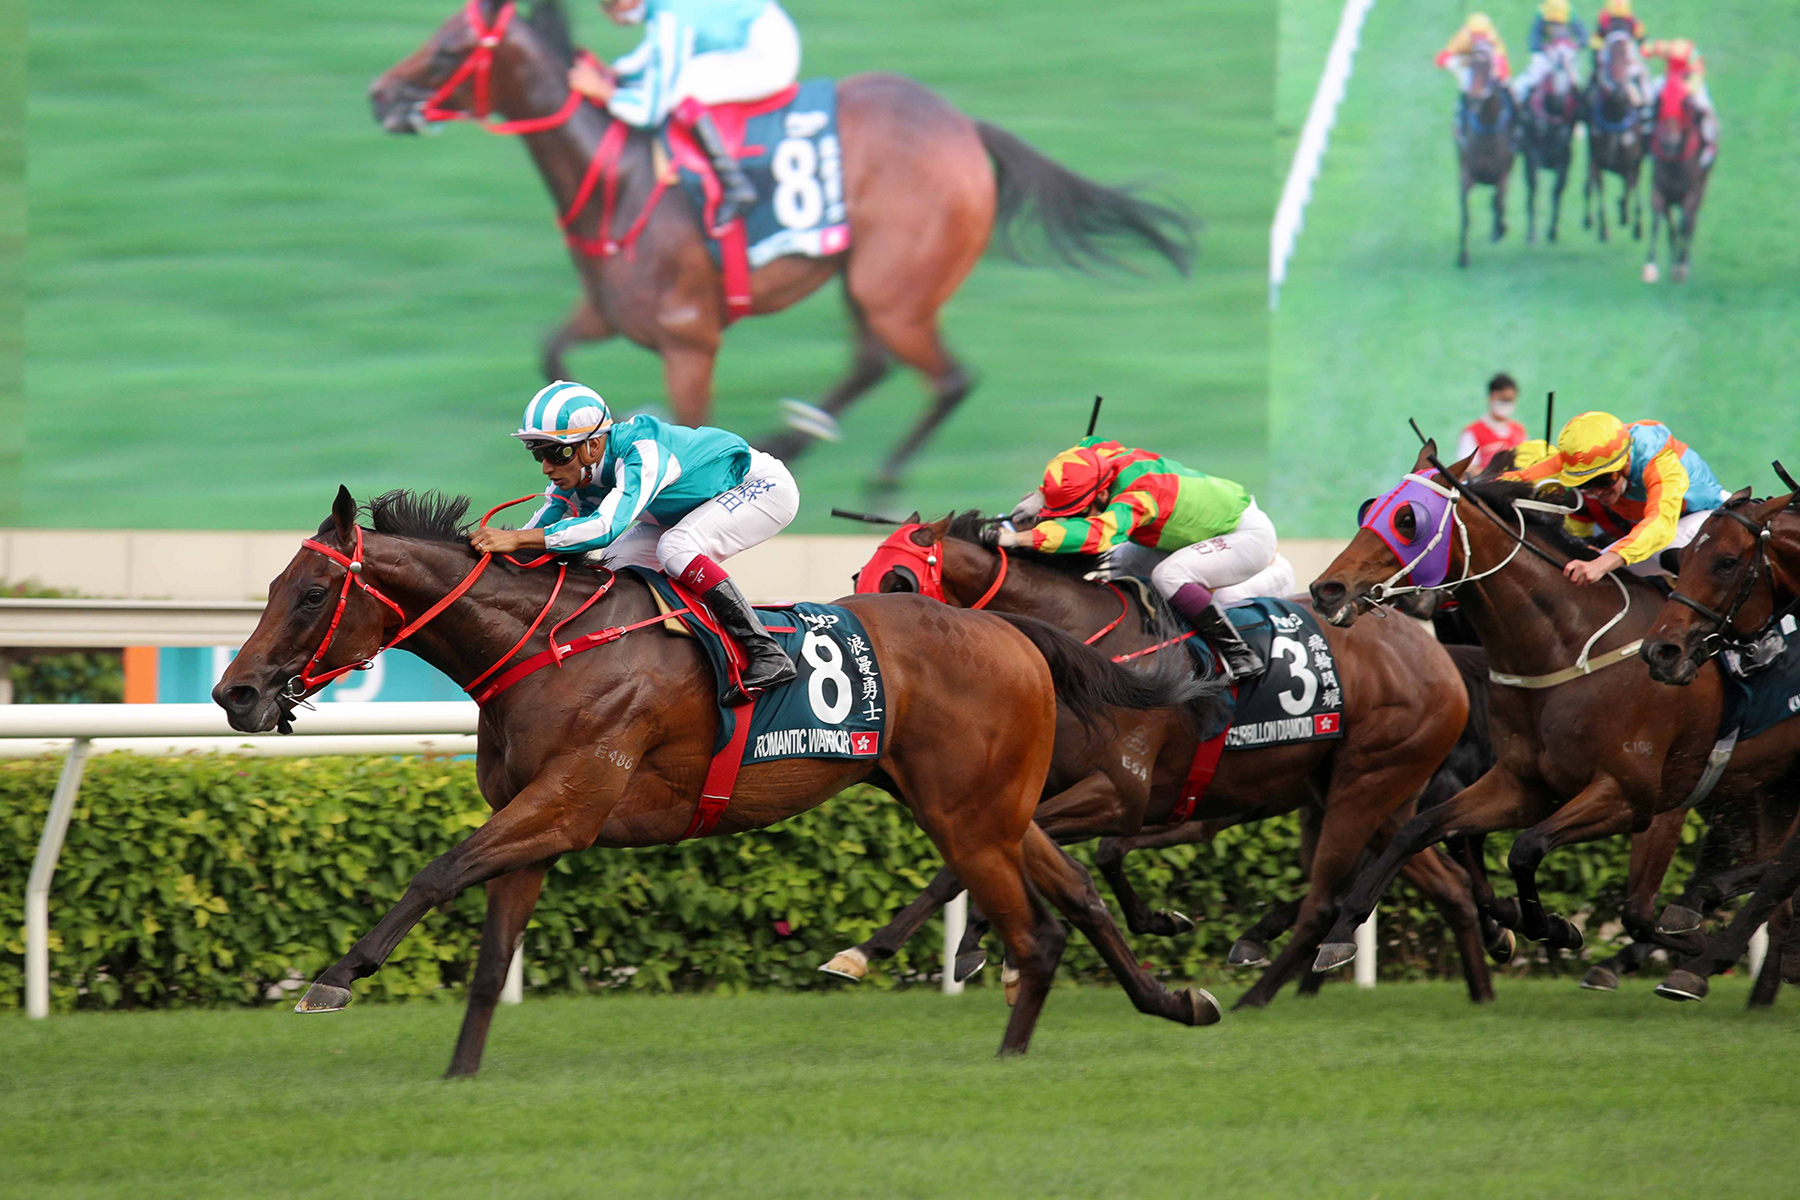 Romantic Warrior, trained by Danny Shum and ridden by Karis Teetan, wins the G1 FWD QEII Cup (2000m) at Sha Tin Racecourse today.